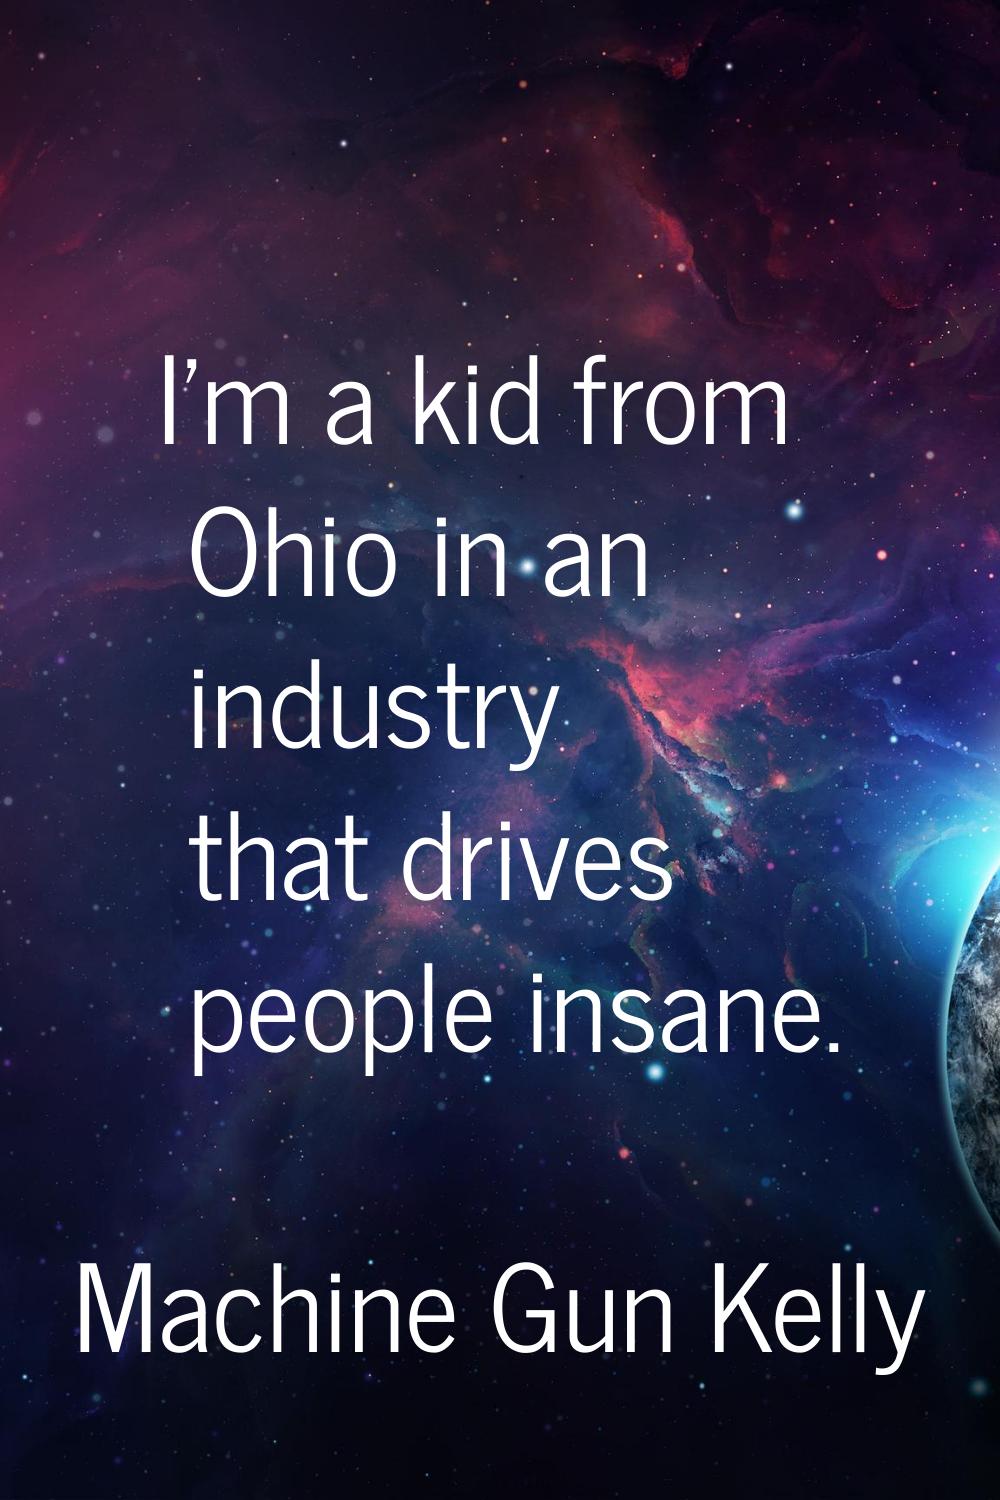 I'm a kid from Ohio in an industry that drives people insane.